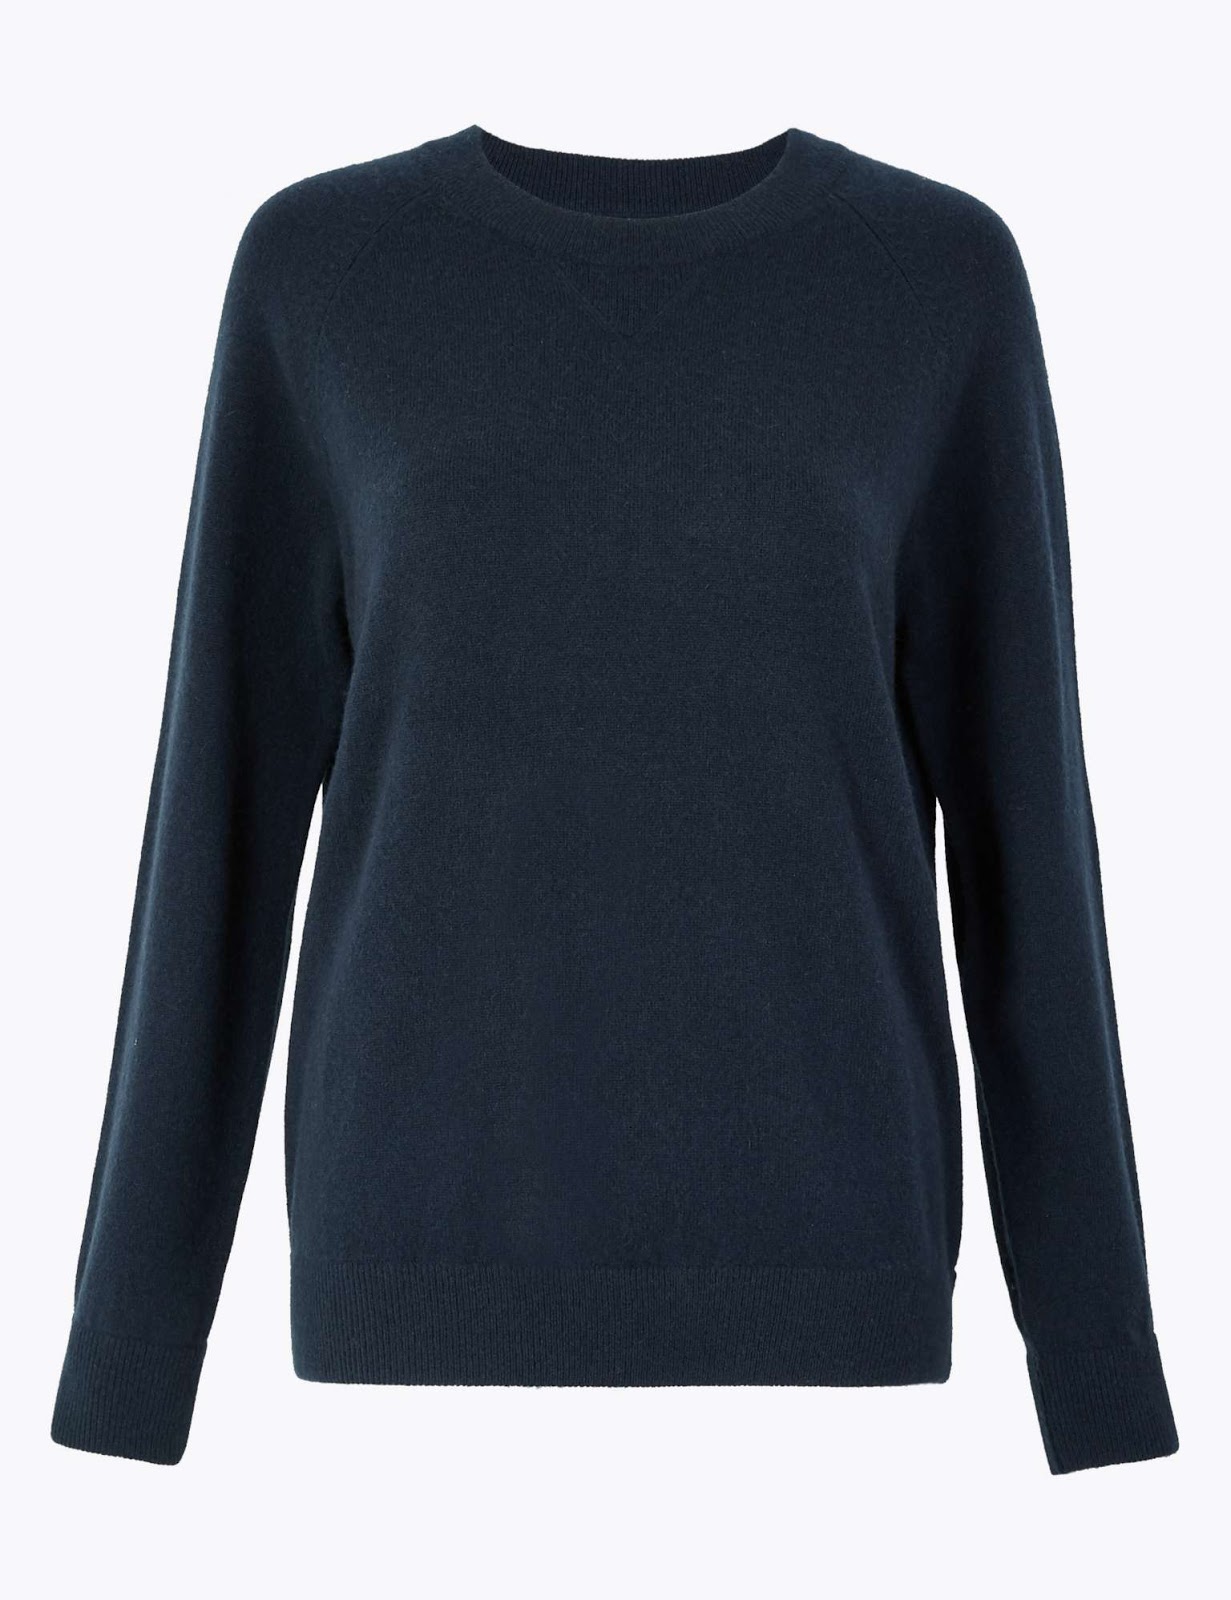 Marks and Spencer pure cashmere relaxed sweatshirt